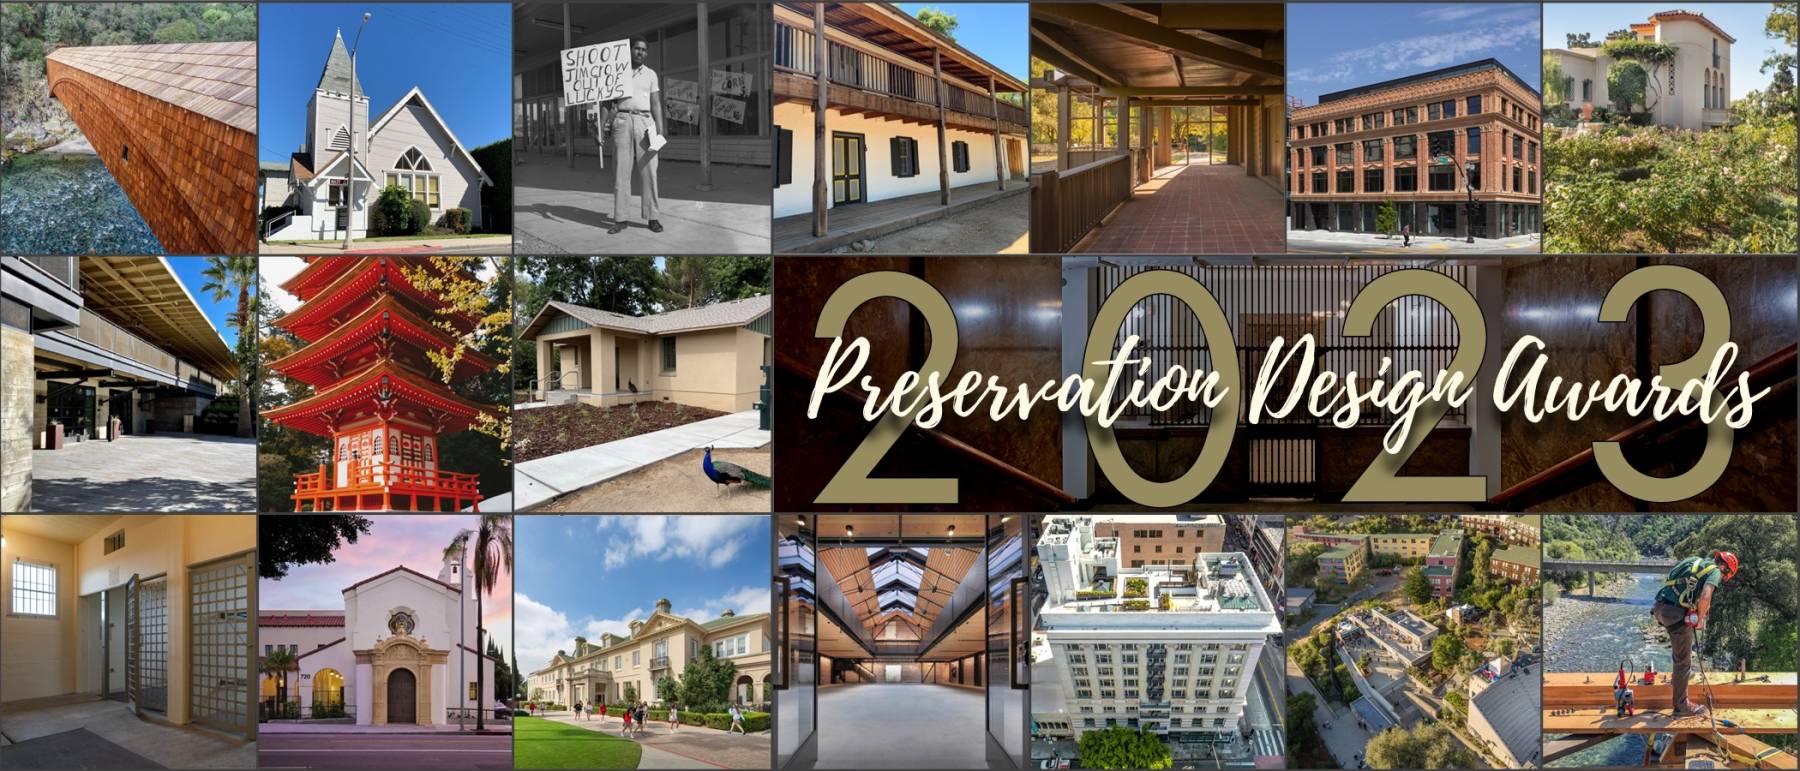 40th Annual Preservation Design Awards